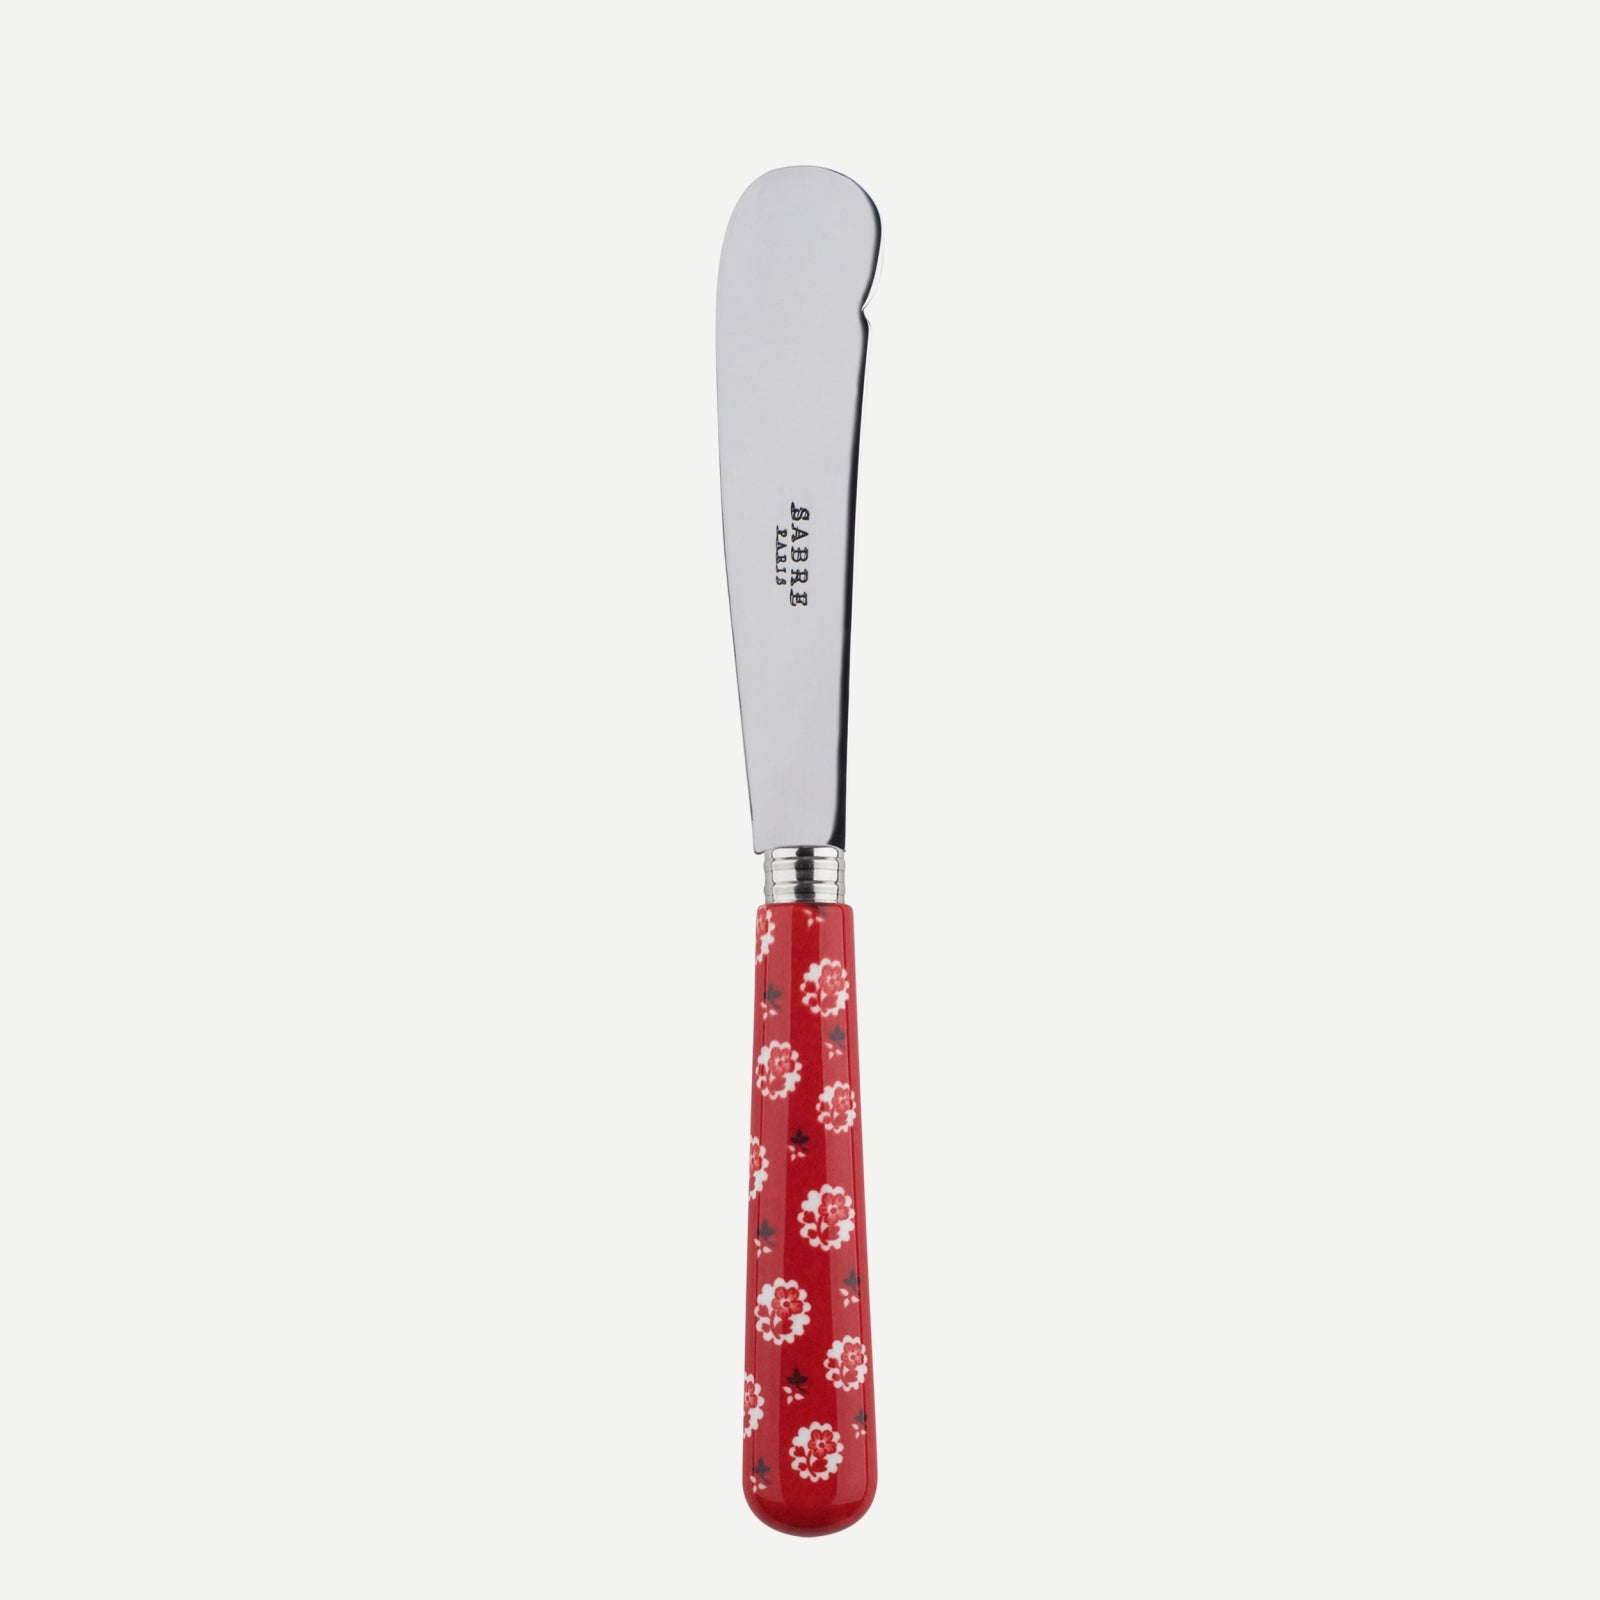 Butter knife - Provencal - Red